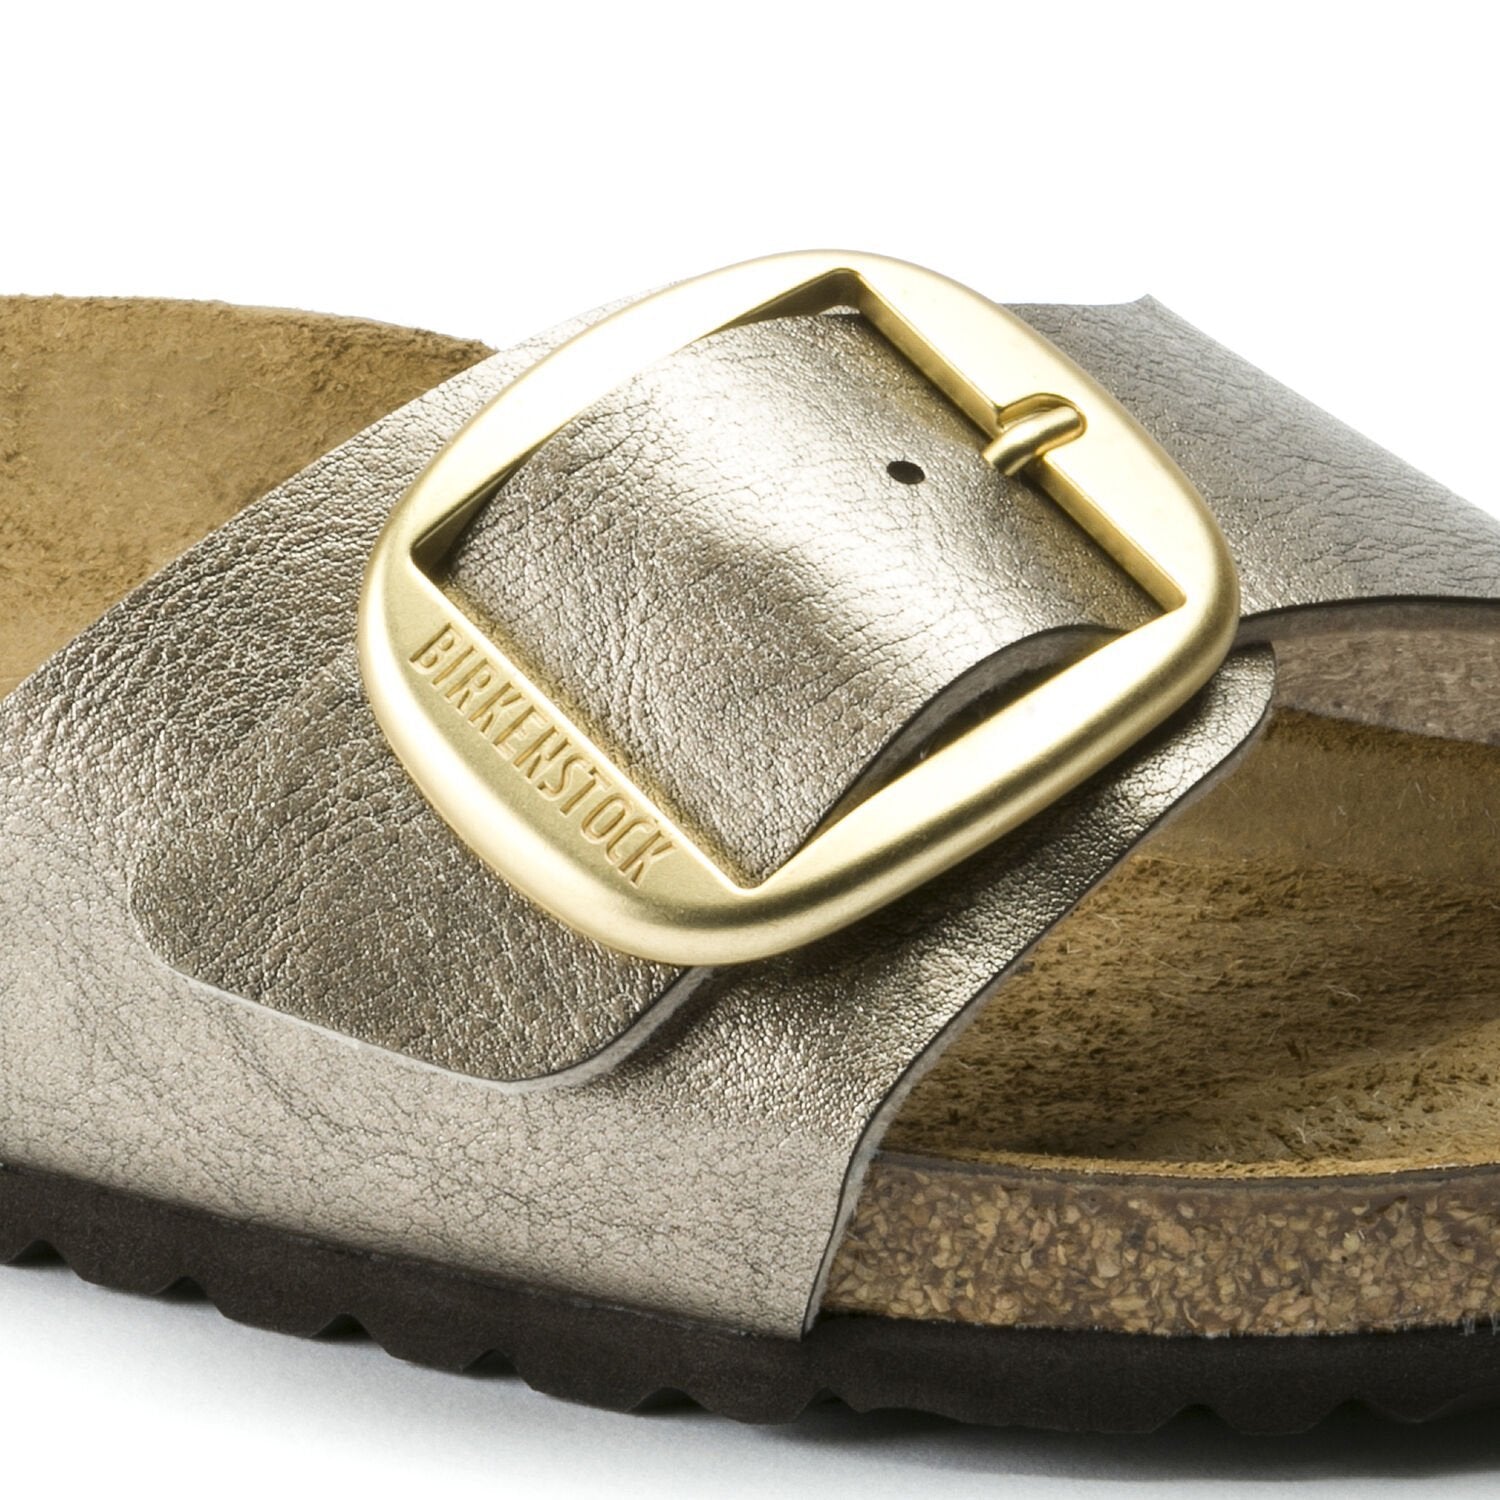 The MADRID Big Buckle slip on- Updated classics  Birkenstock madrid big  buckle outfit, Buckle outfits, Birkenstock sandals outfit